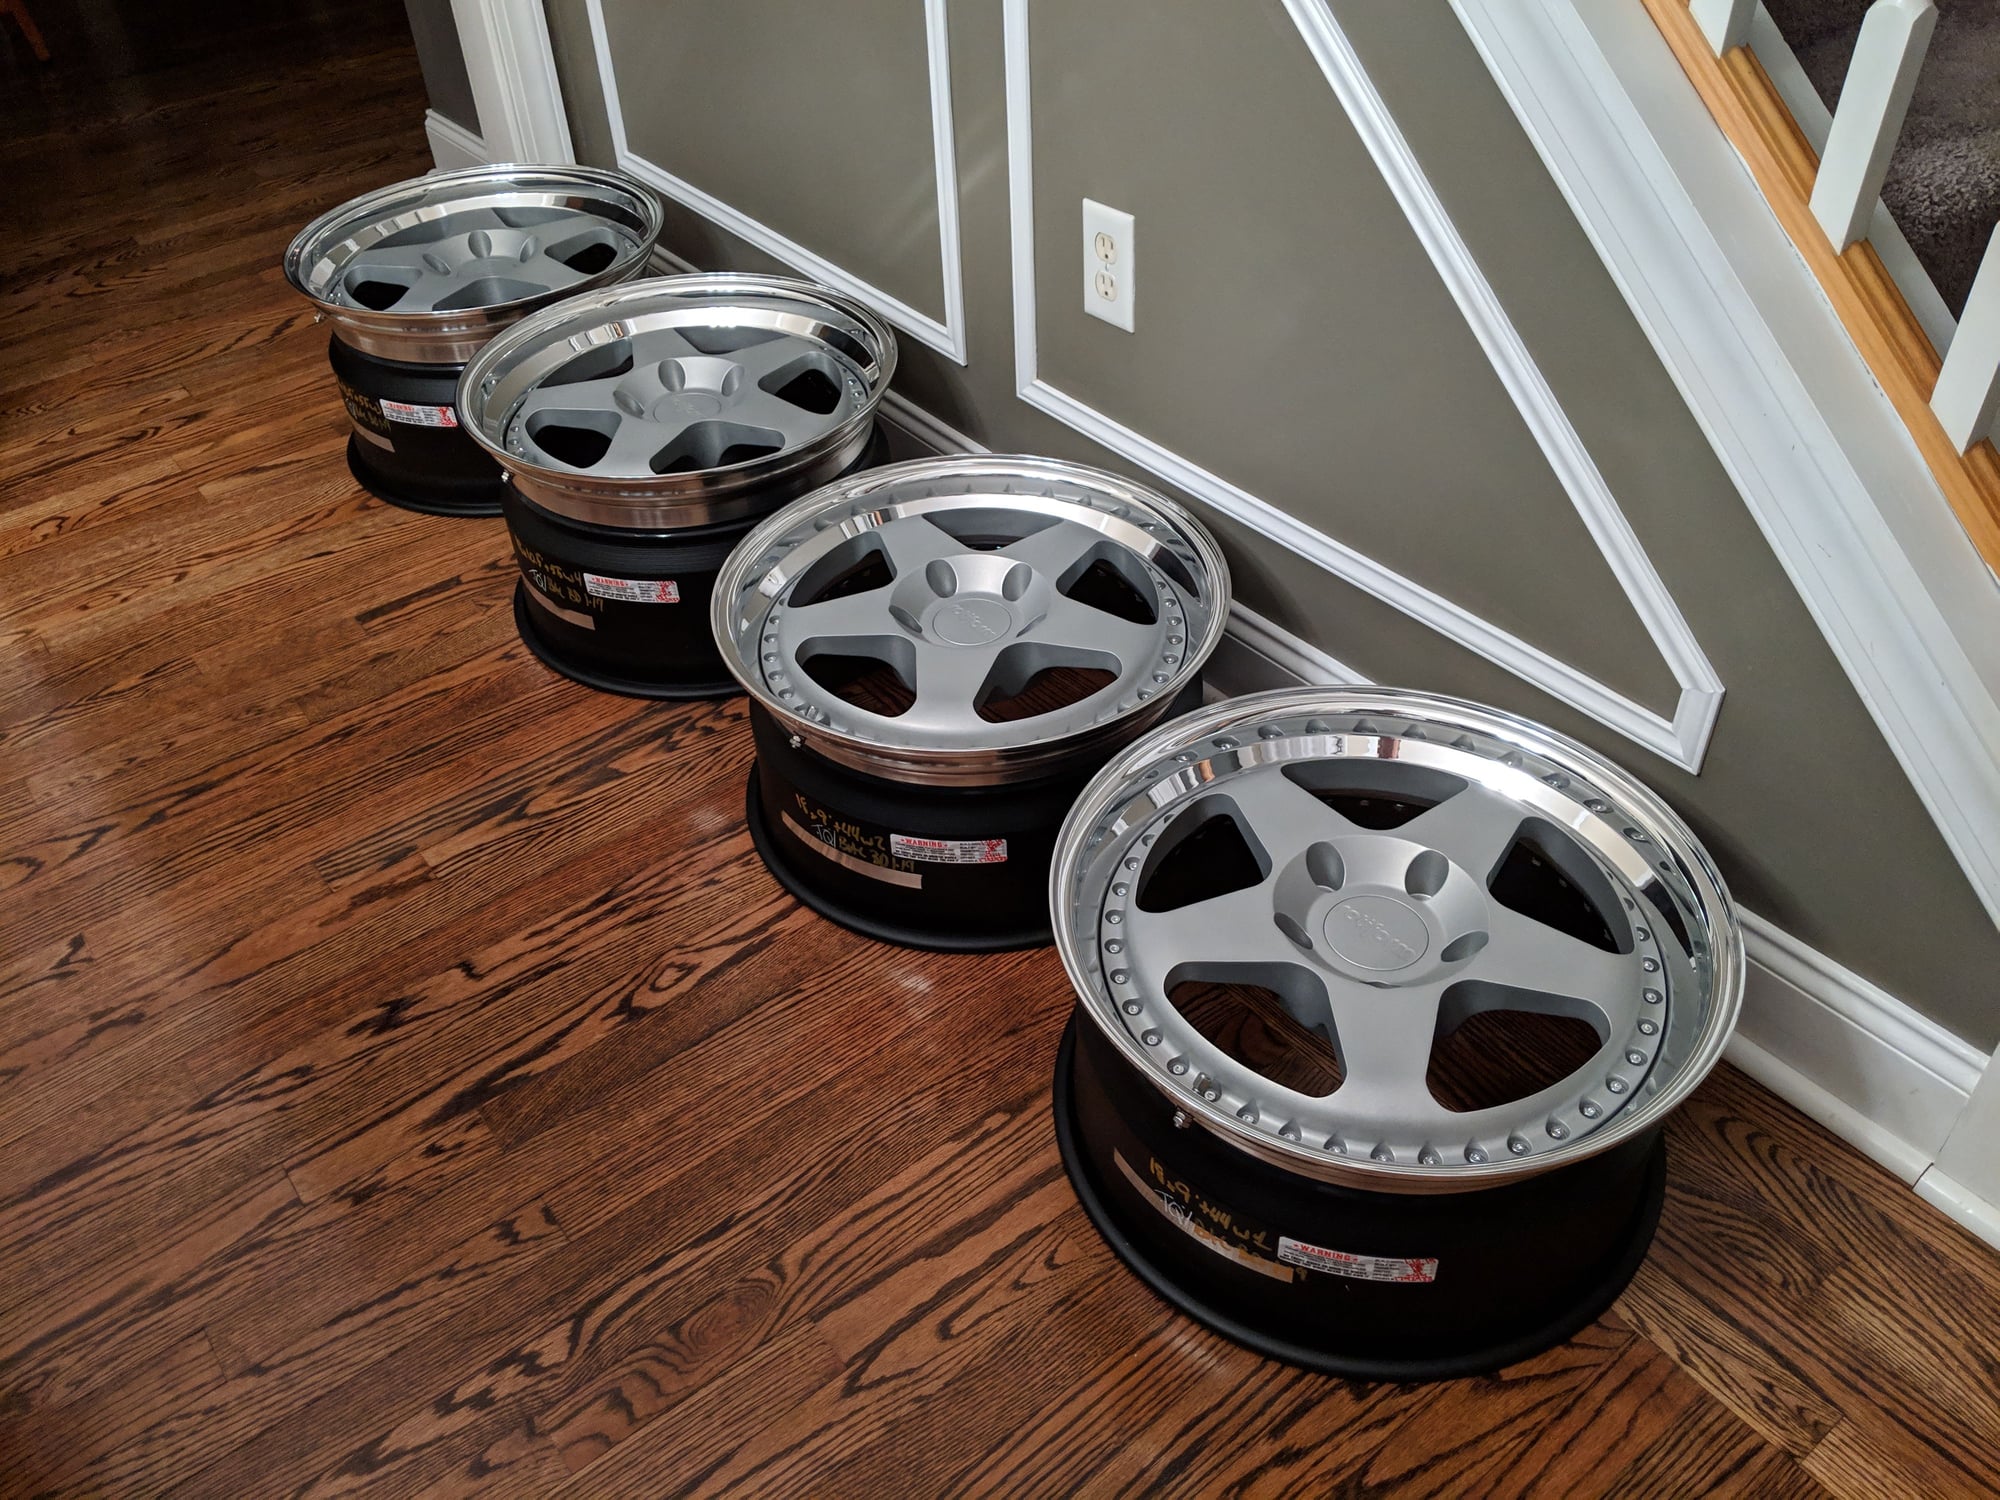 Wheels and Tires/Axles - Rotiform 18" ROC 3-piece forged wheels *LIKE NEW* - Used - 1995 to 2004 Porsche 911 - 2006 to 2016 Porsche Boxster - 2006 to 2016 Porsche Cayman - Webster, NY 14580, United States